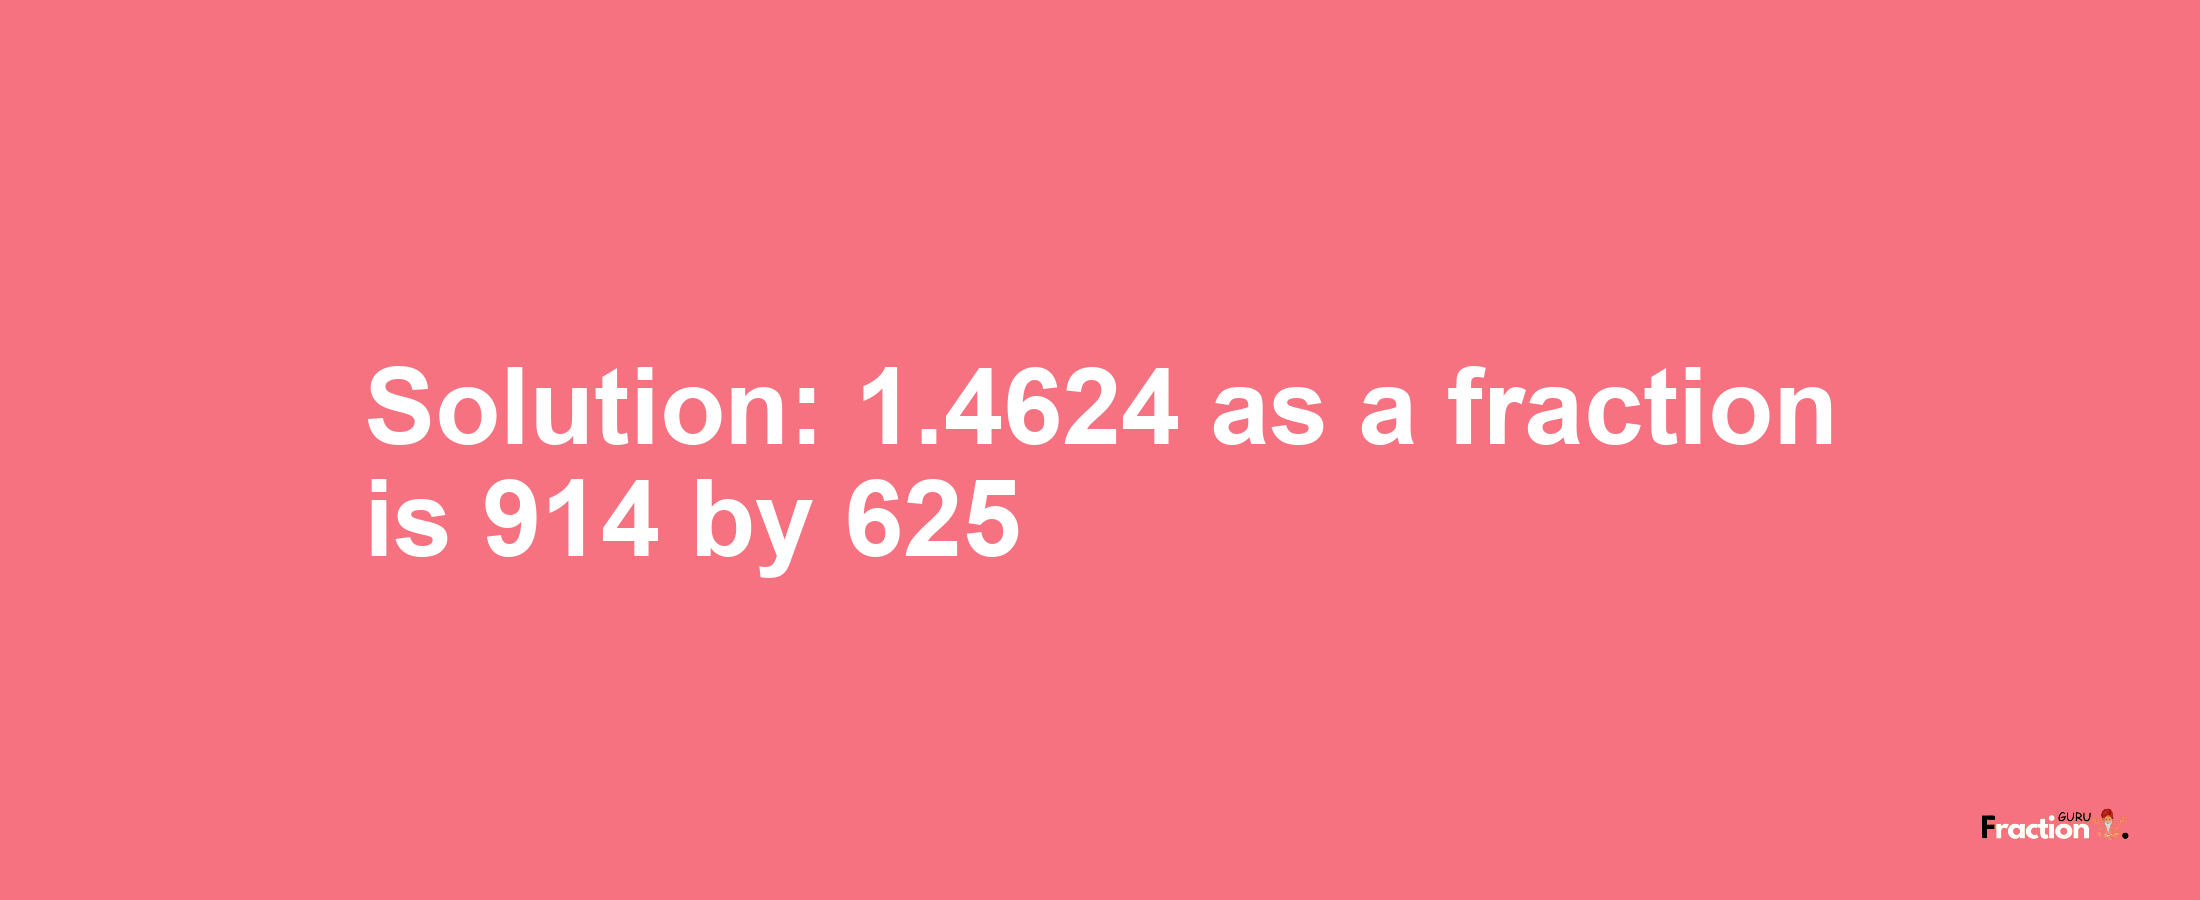 Solution:1.4624 as a fraction is 914/625